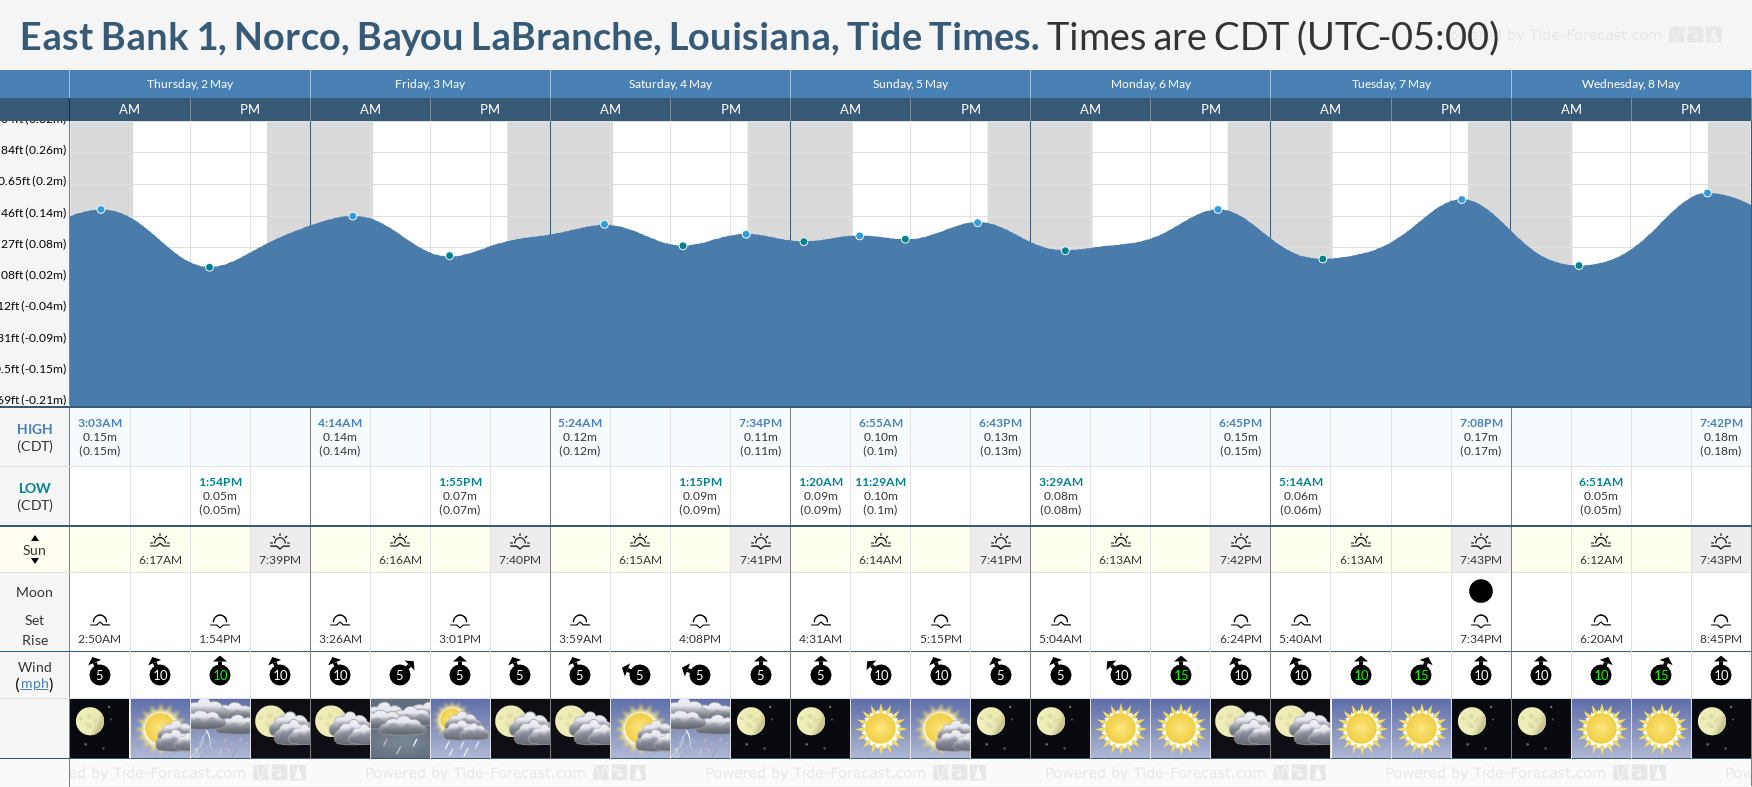 East Bank 1, Norco, Bayou LaBranche, Louisiana Tide Chart including high and low tide tide times for the next 7 days